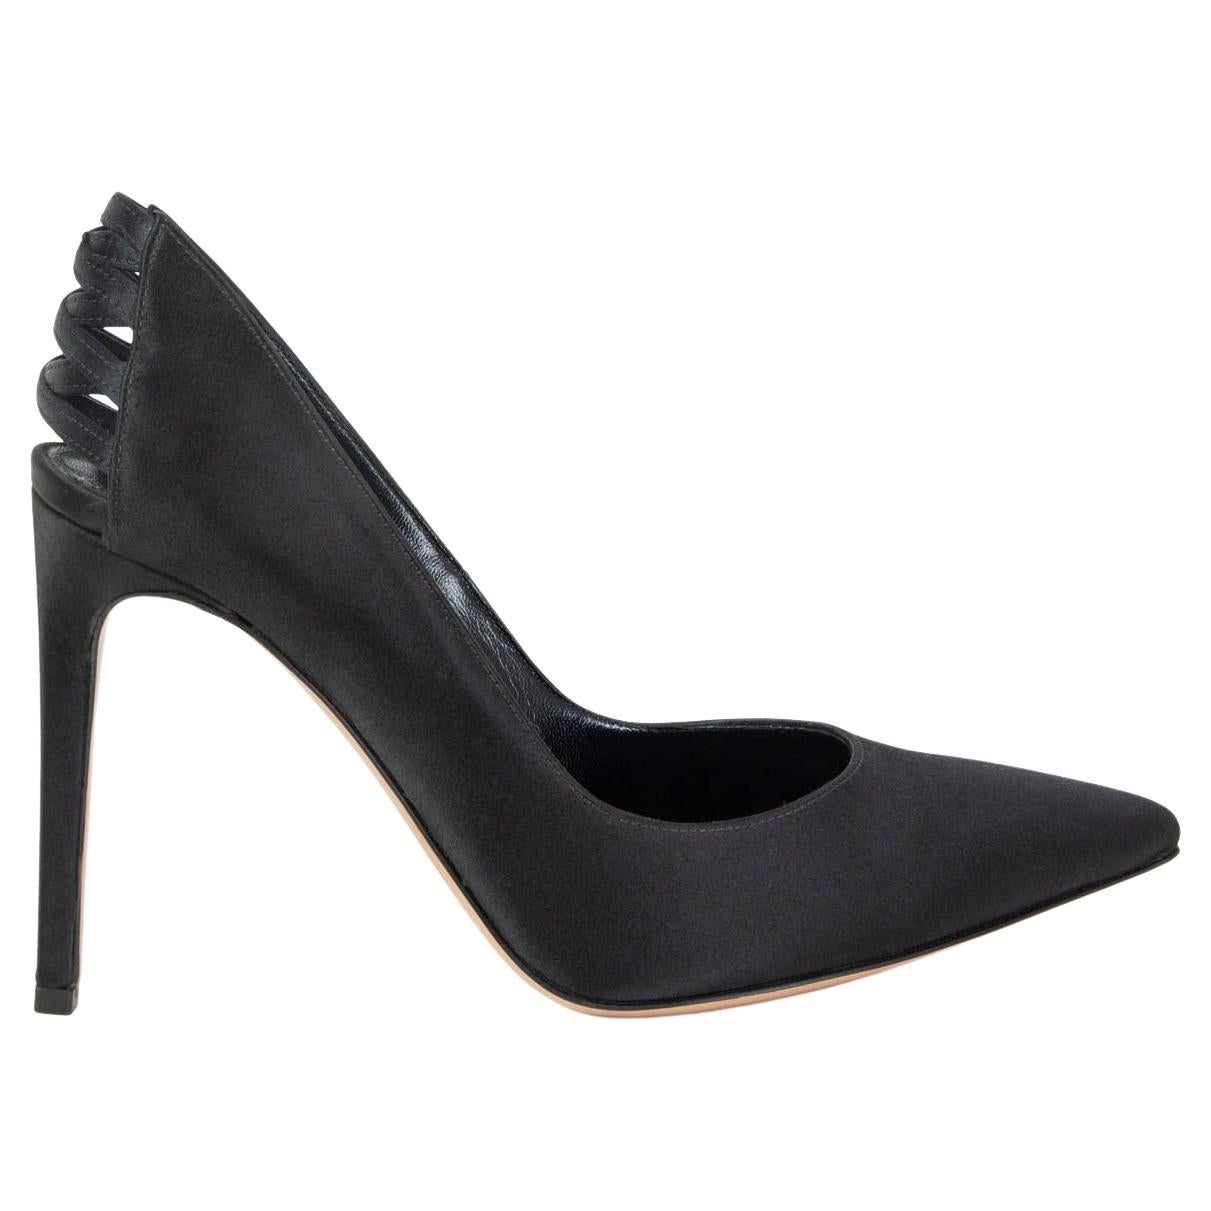 GIANVITO ROSSI black SATIN Pointed Toe Pumps Shoes 37 For Sale